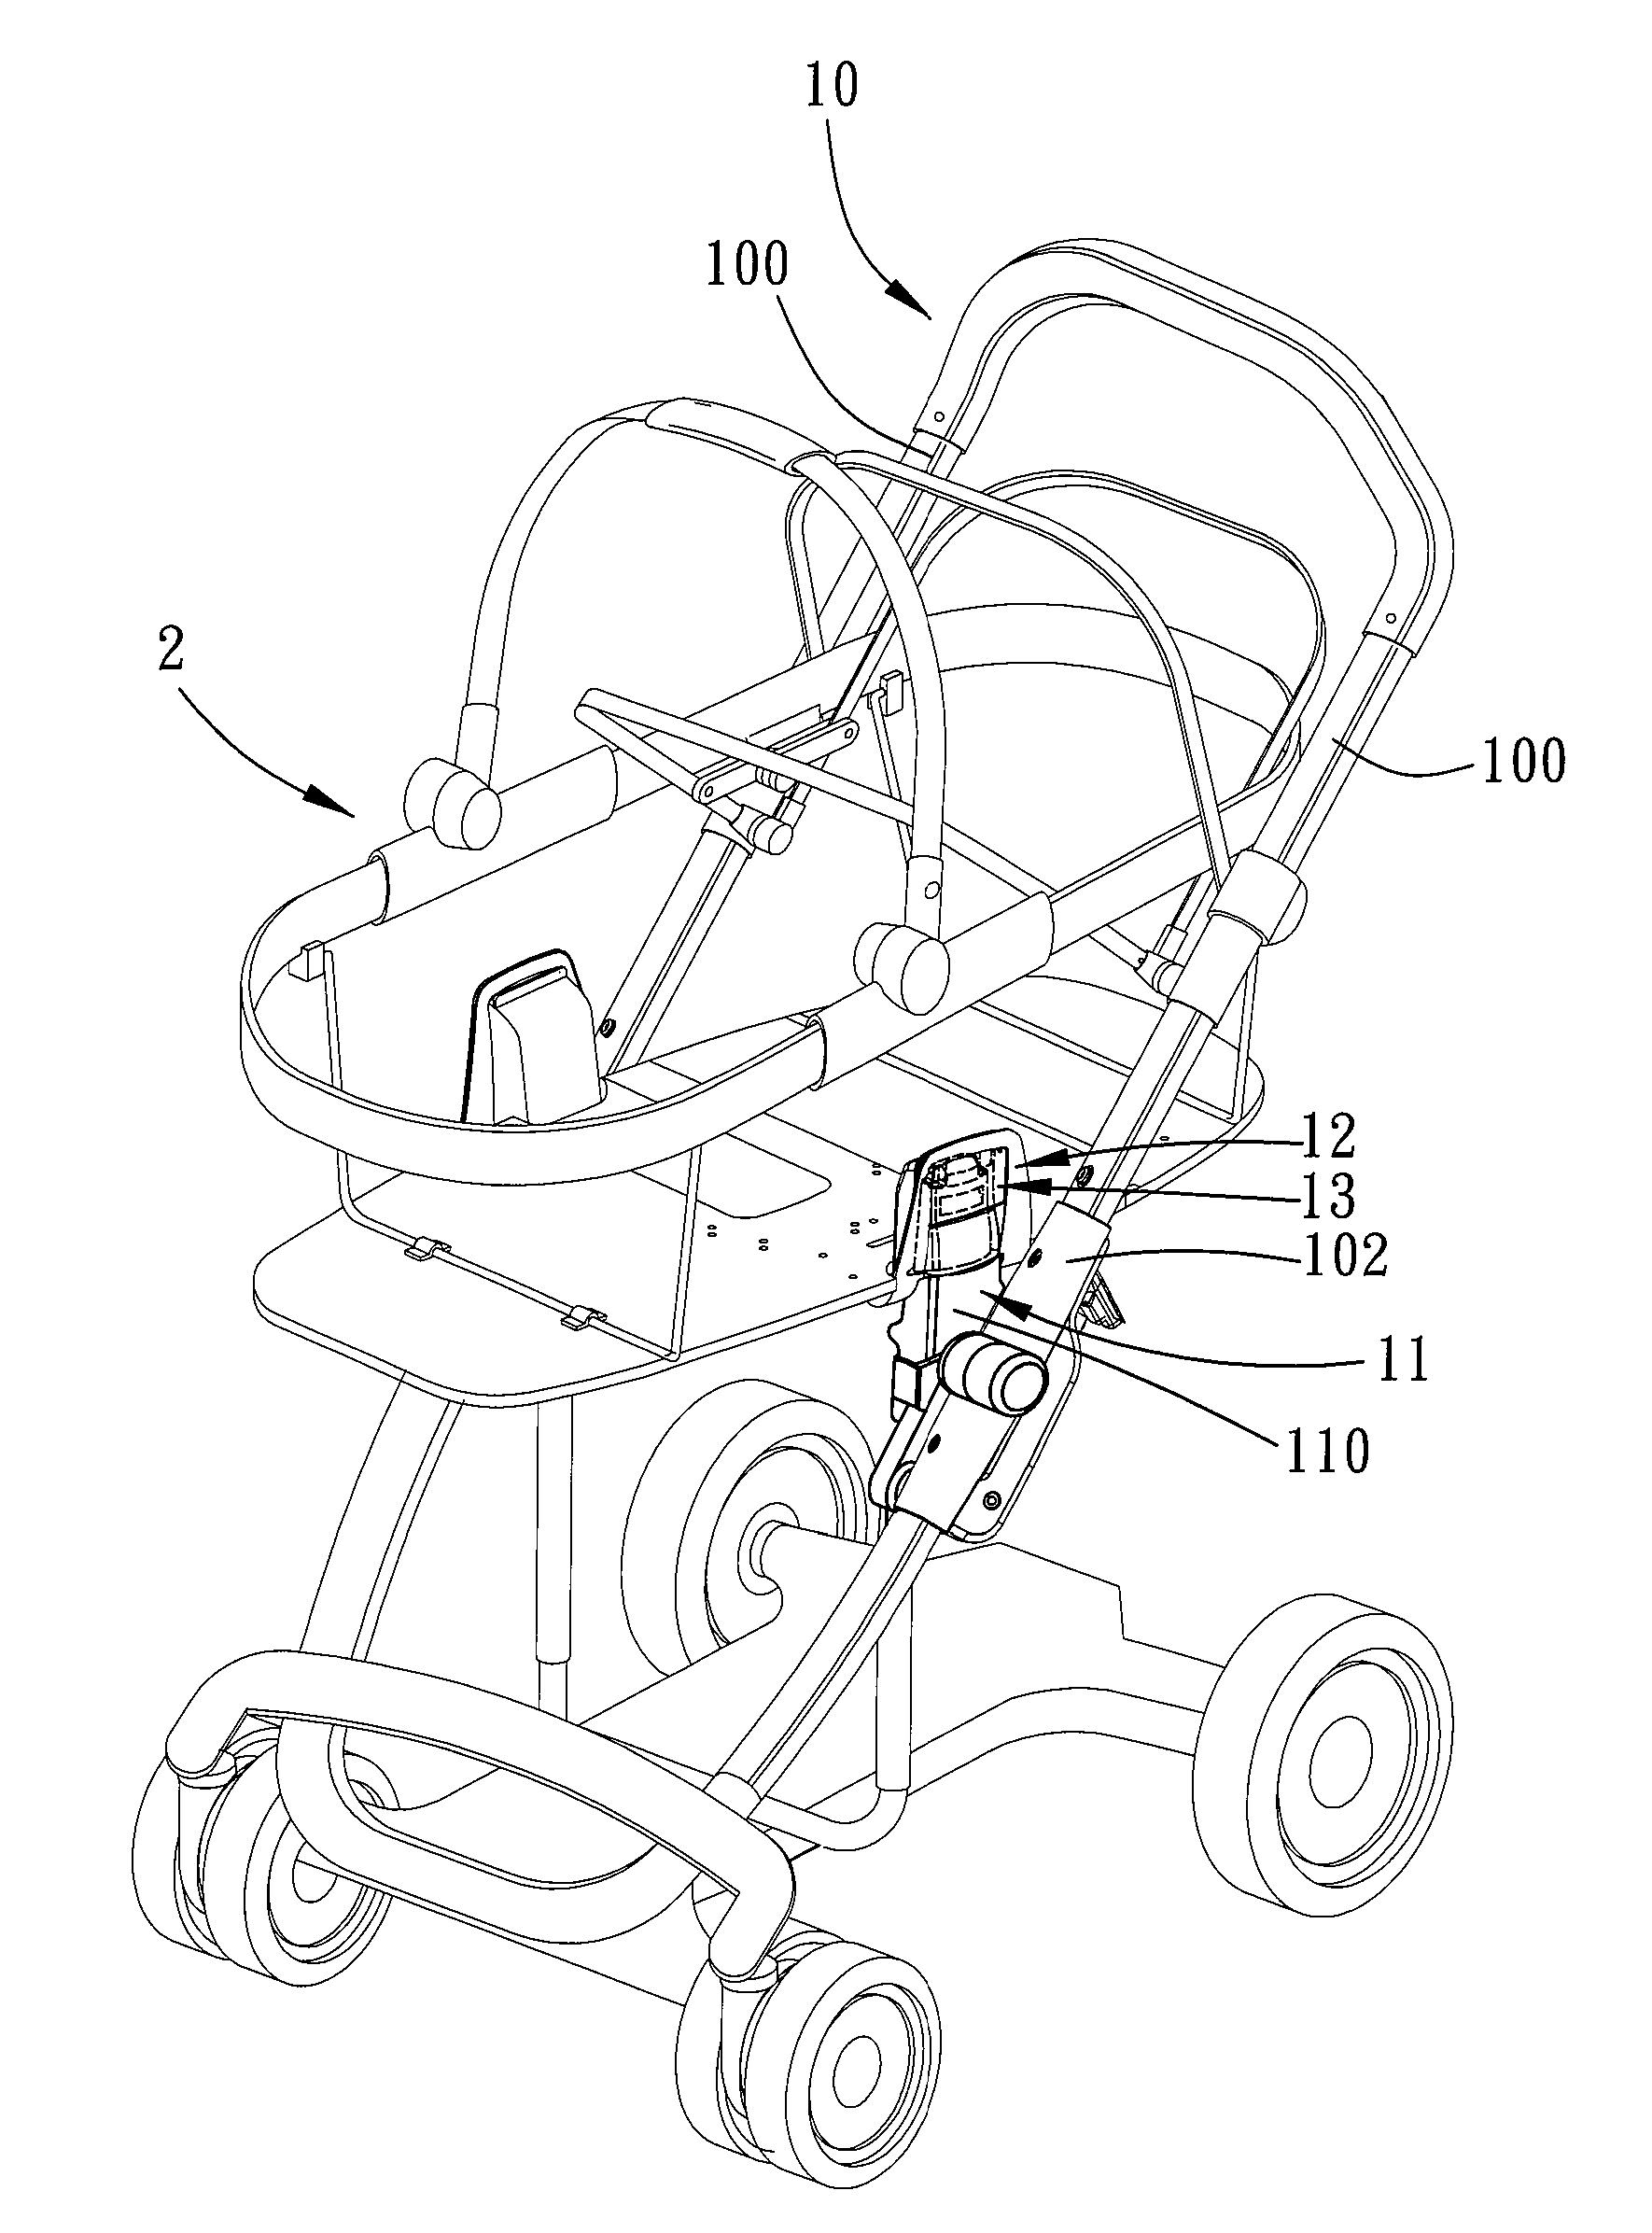 Latch device for coupling a carrier to a stroller frame